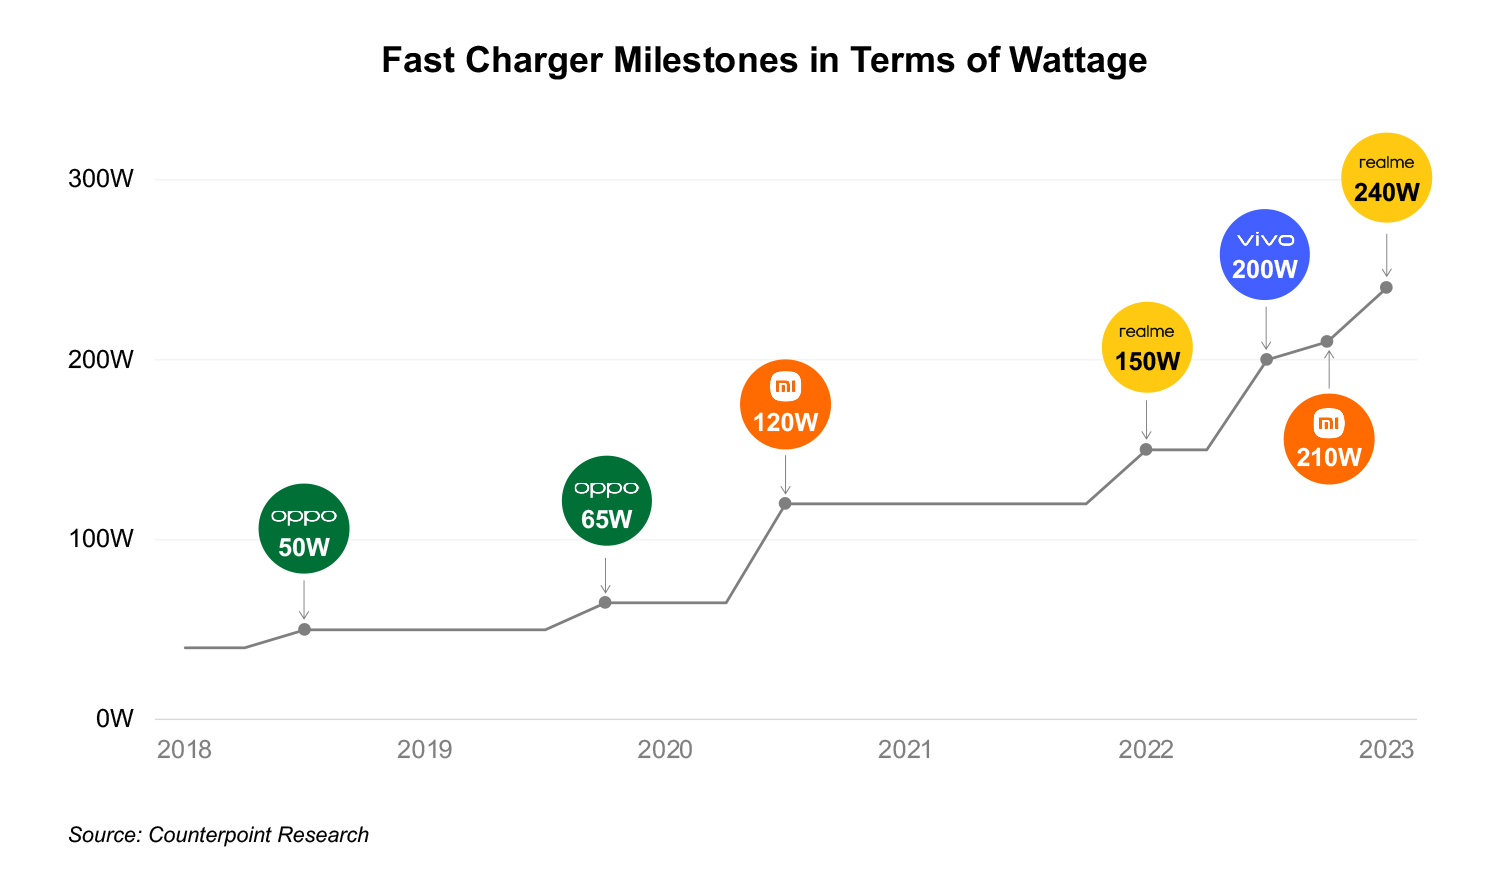 A chart showing the fast charging milestones in terms of wattage